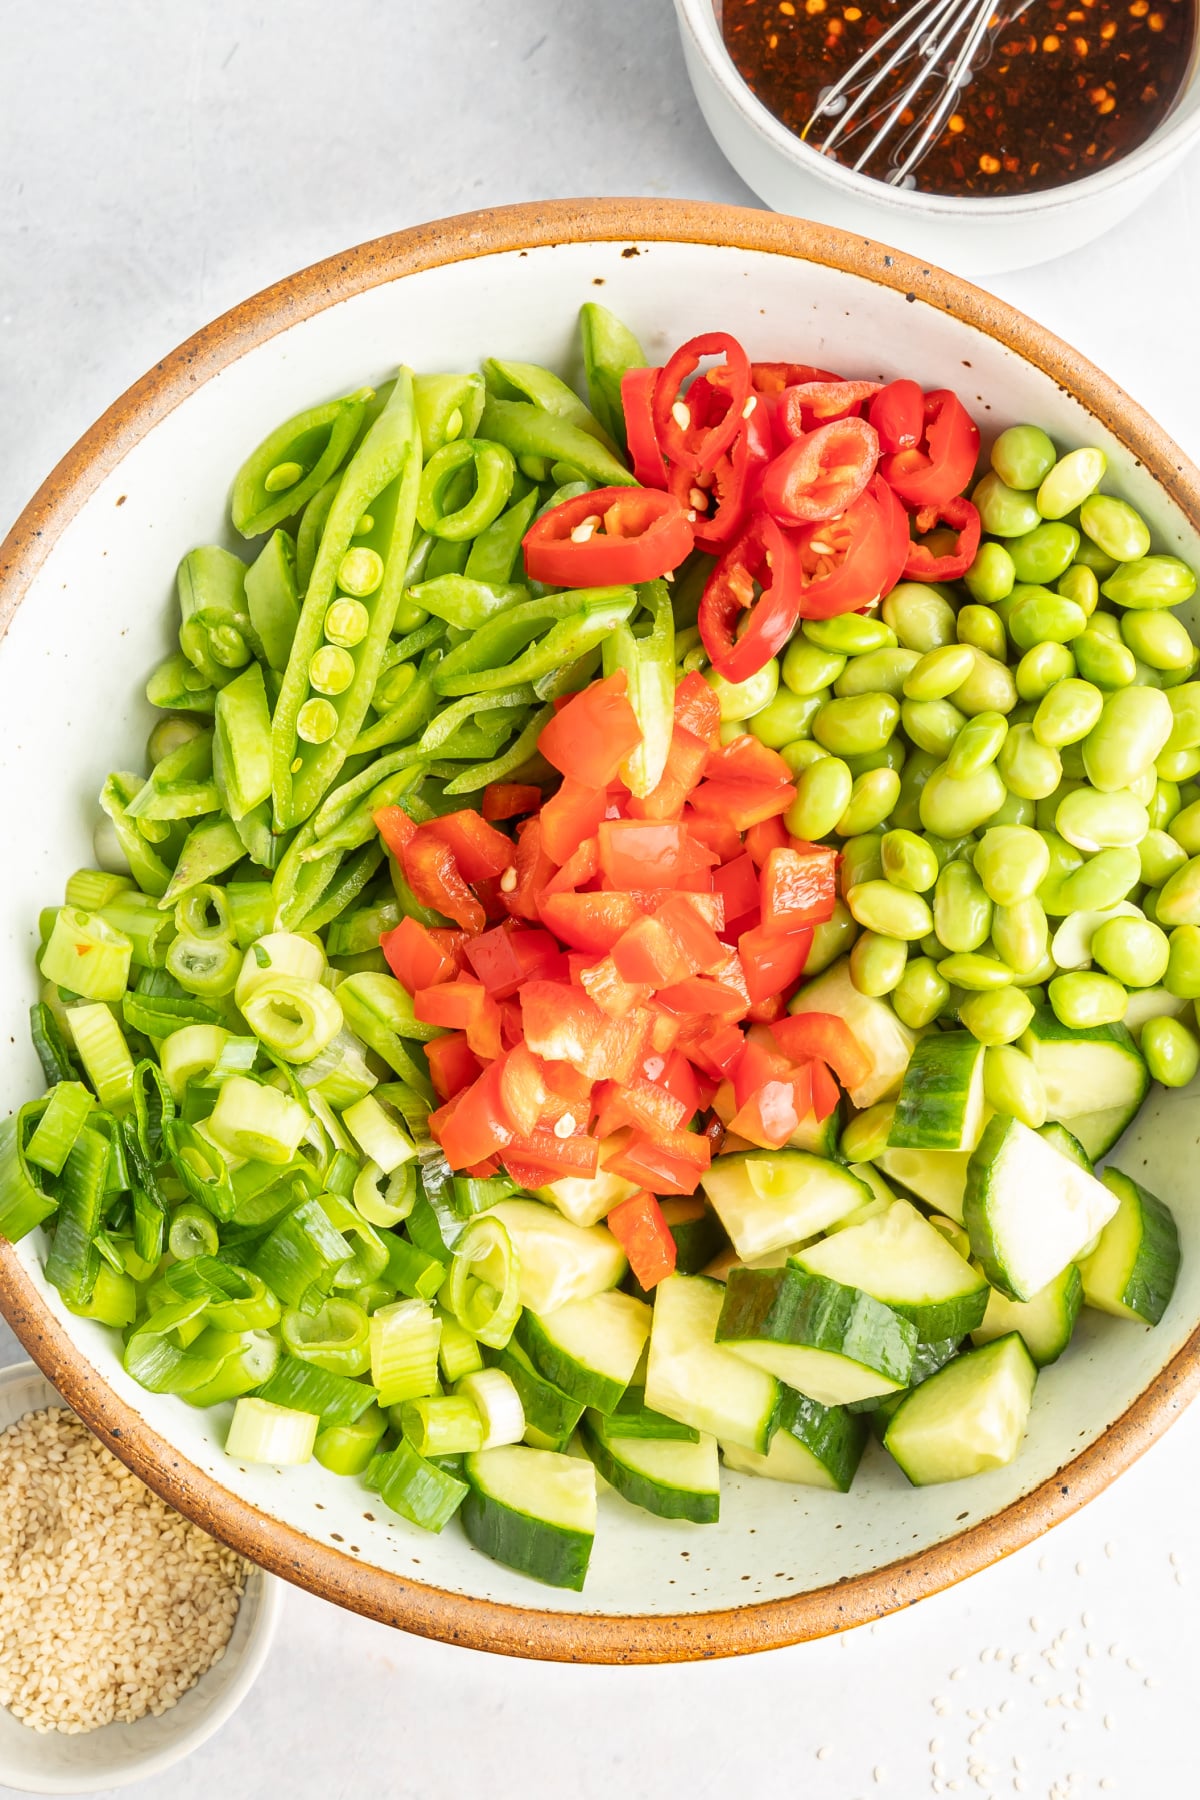 Overhead view of edamame cucumber salad in a bowl before tossing together: salad has edamame, cucumber, snap peas, red bell pepper, green onions, chili peppers and sesame seeds.